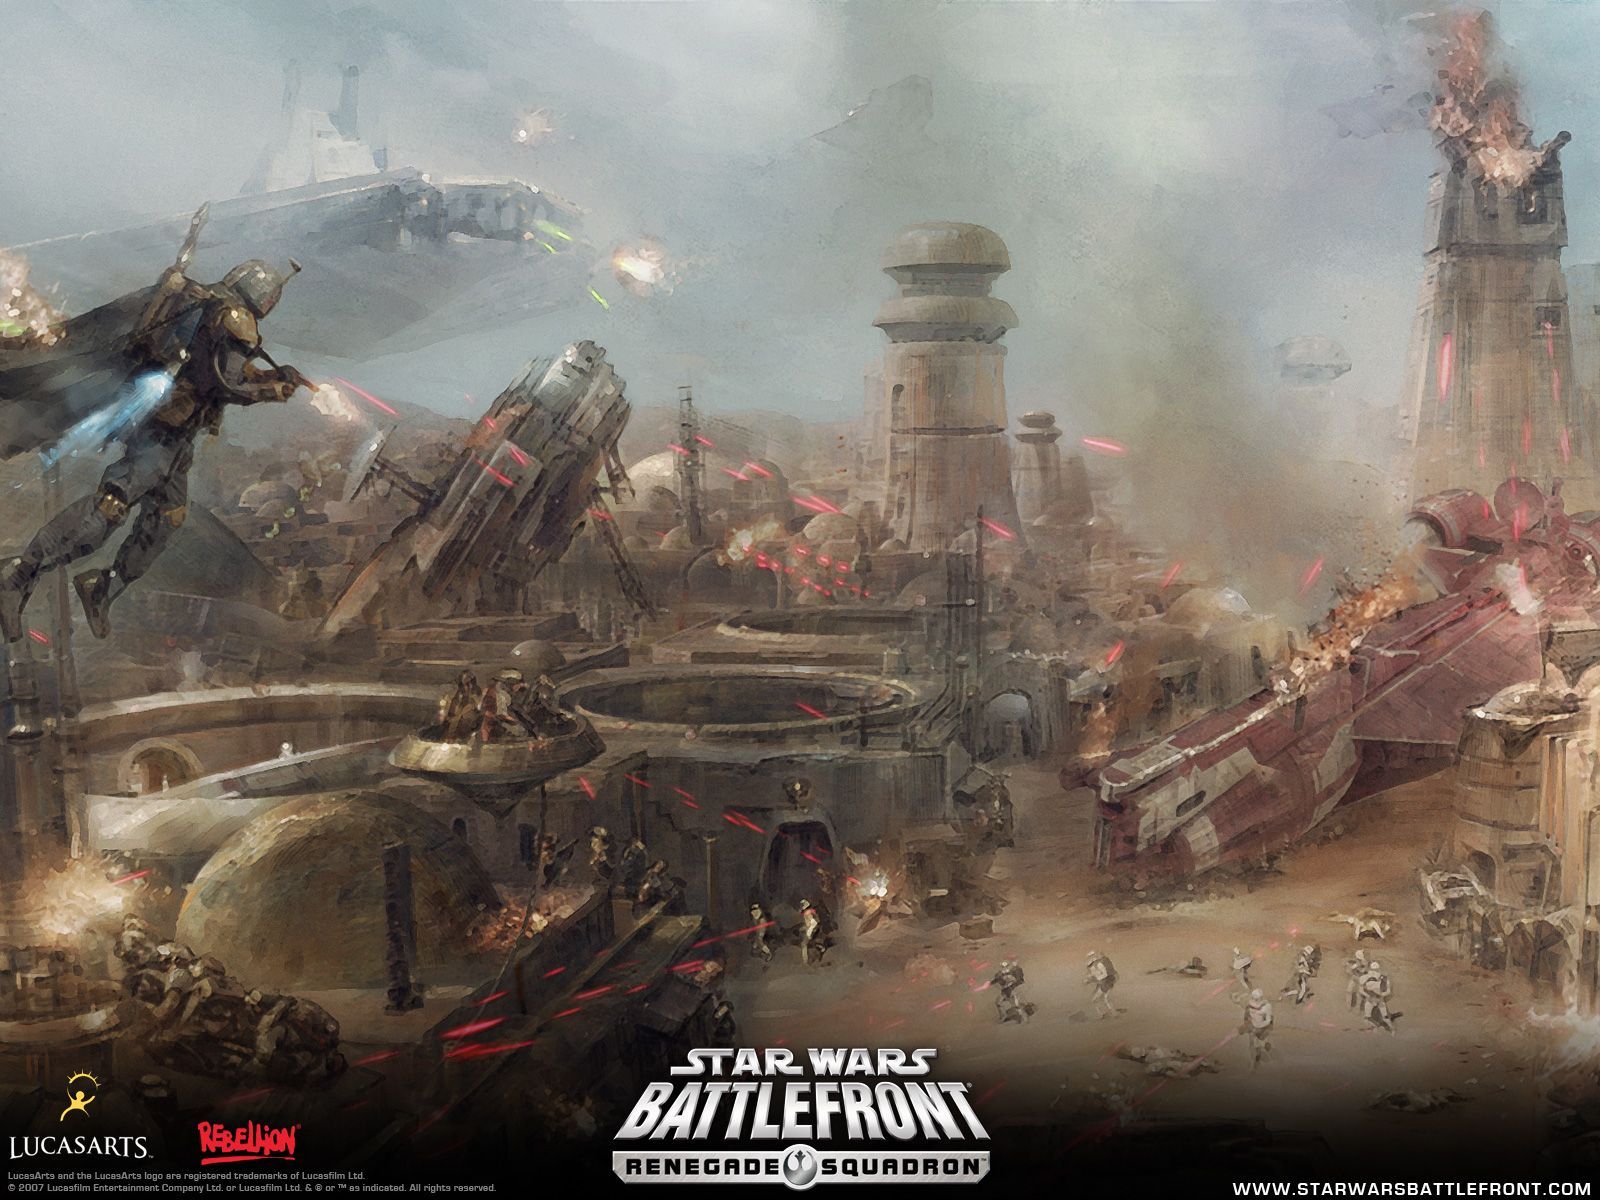 Star Wars Battlefront Renegade Squadron 7 3LOAGSHPU3 1600×1200 « Awesome Wallpaper